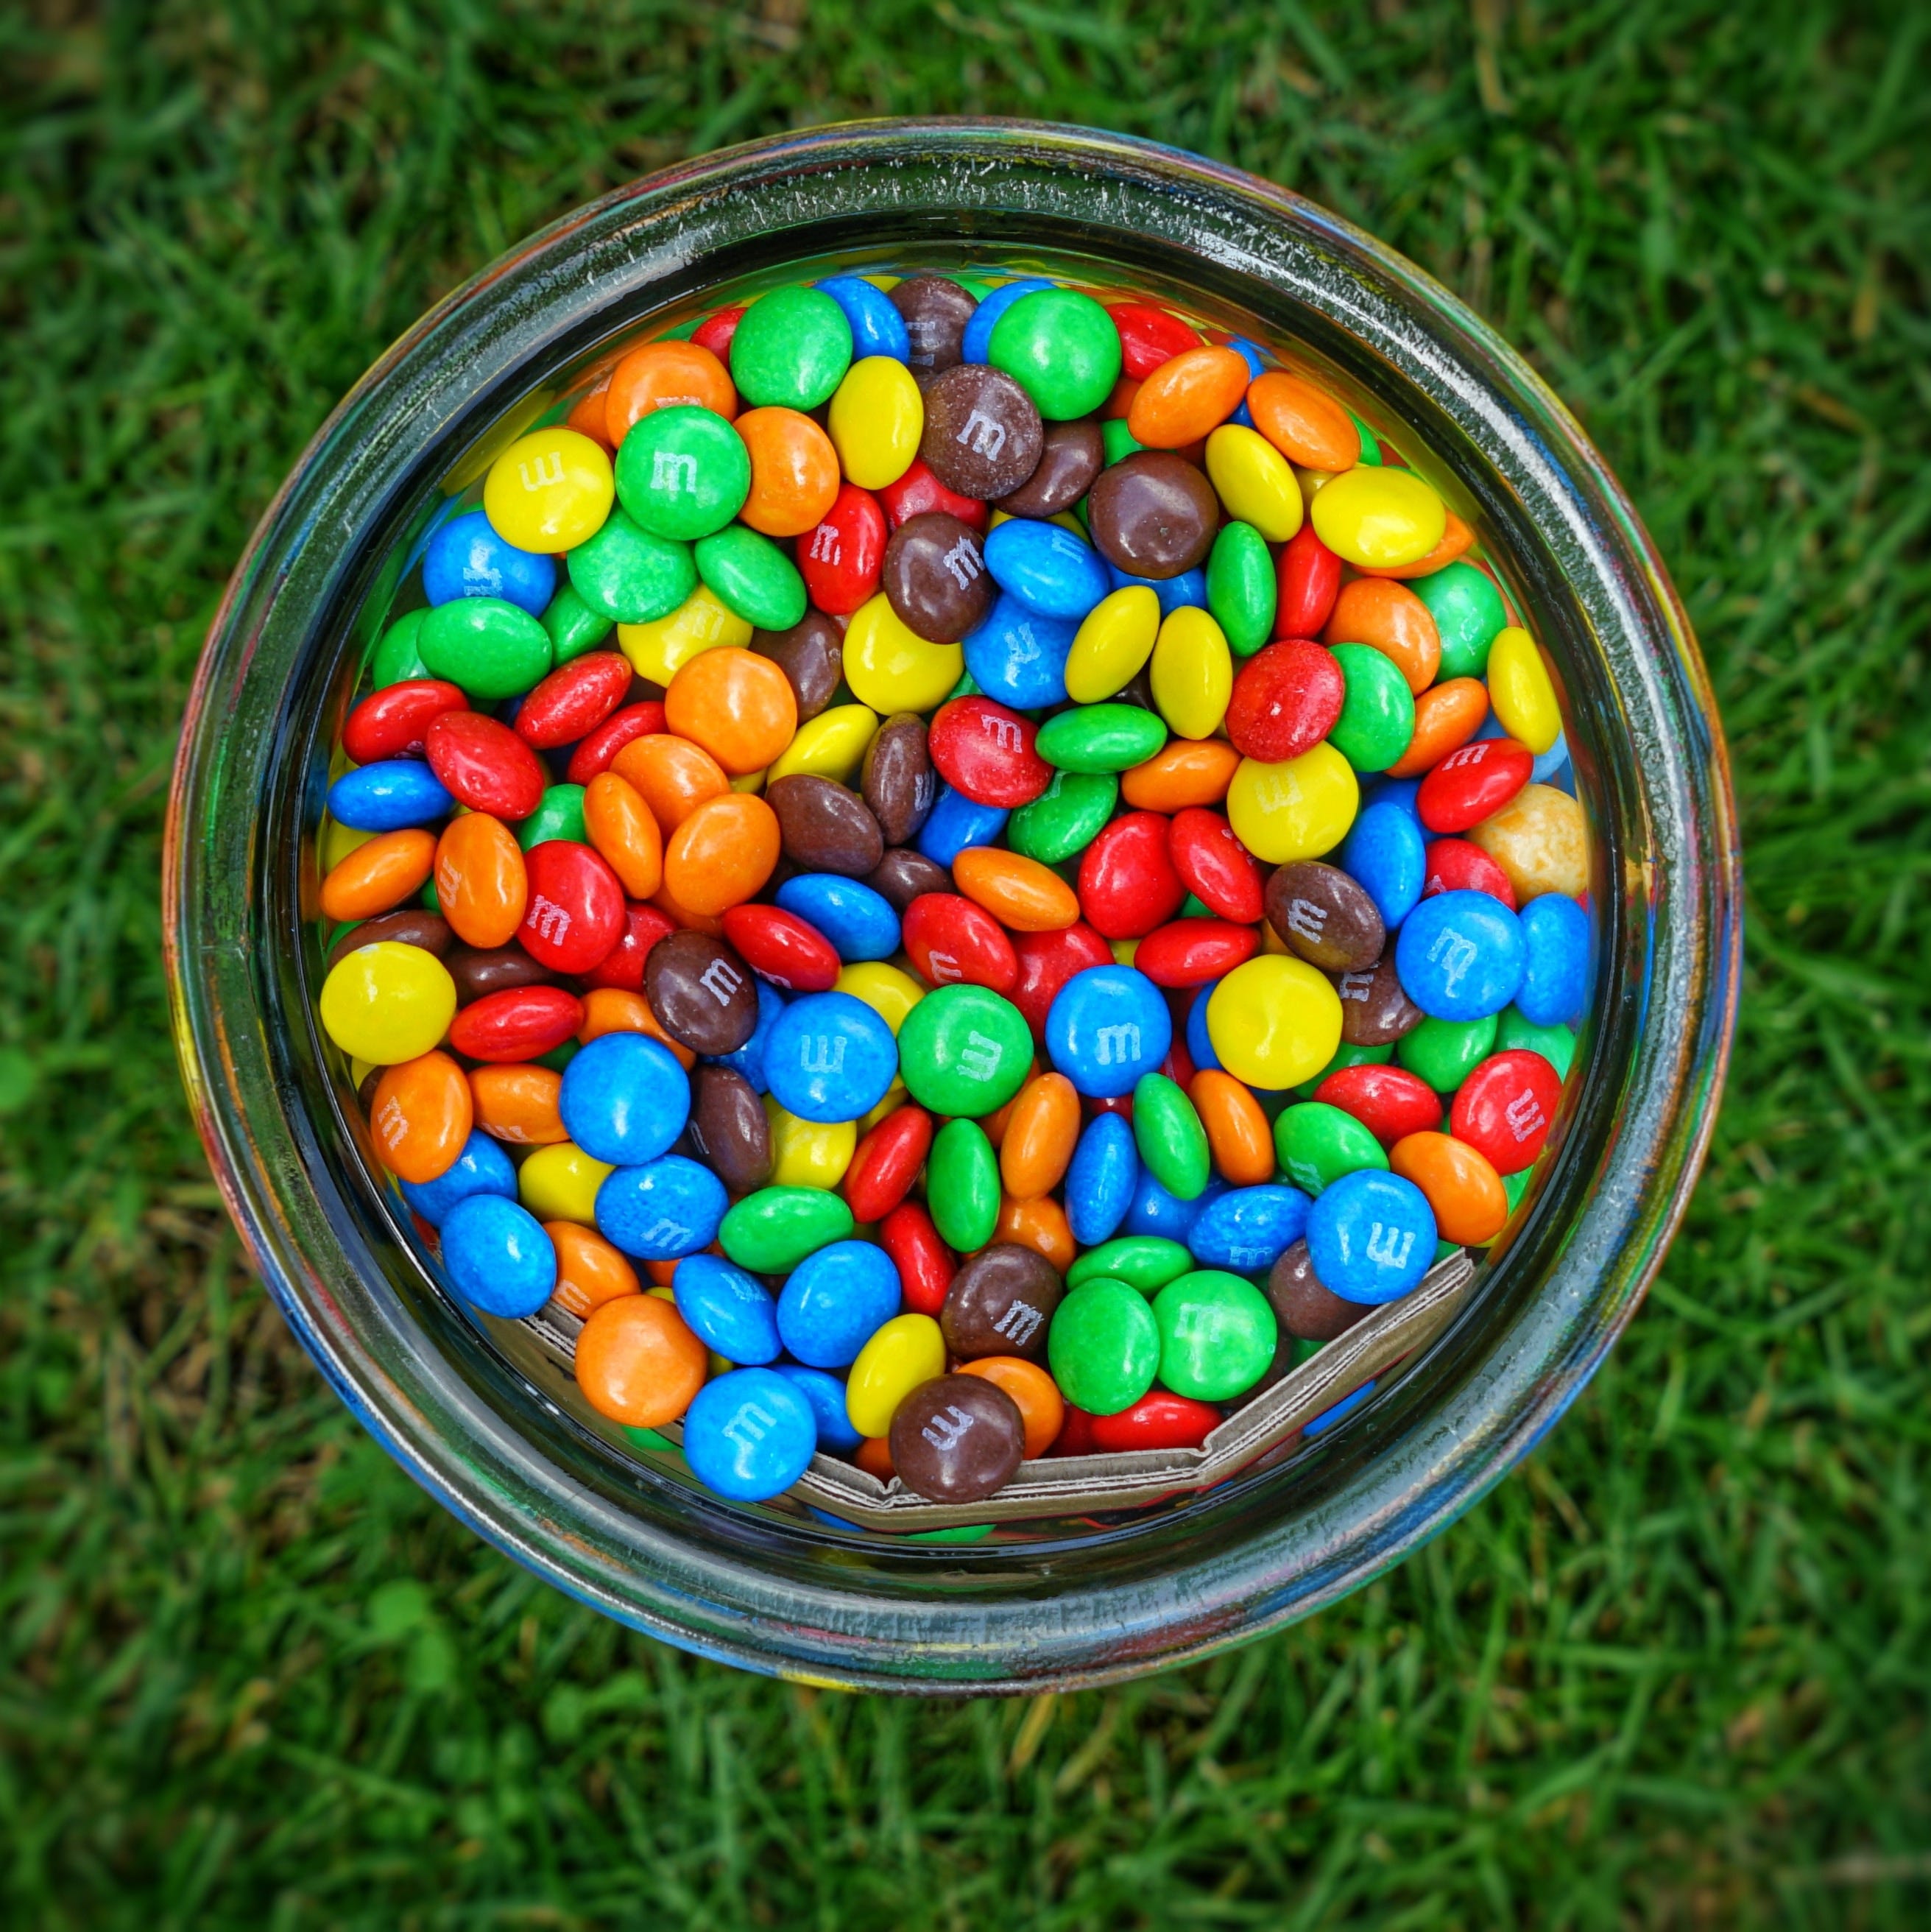 My M&M's: Exclusive, Colorful Offer for YOU!